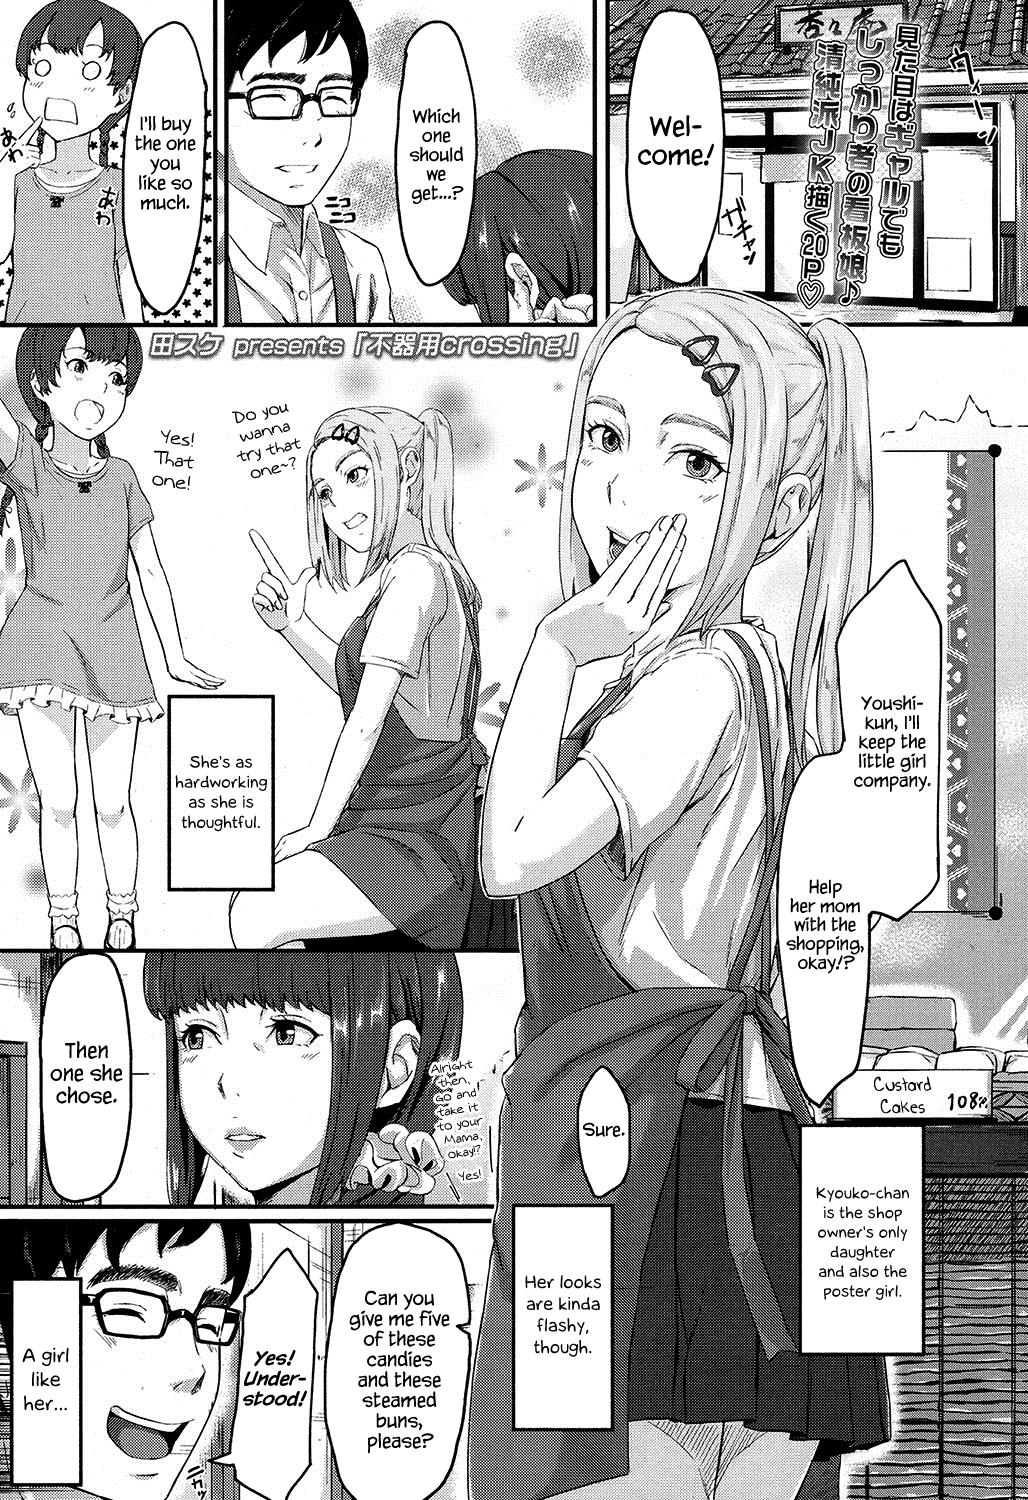 Fist Bukiyou crossing | Clumsy Crossing Public Nudity - Page 1